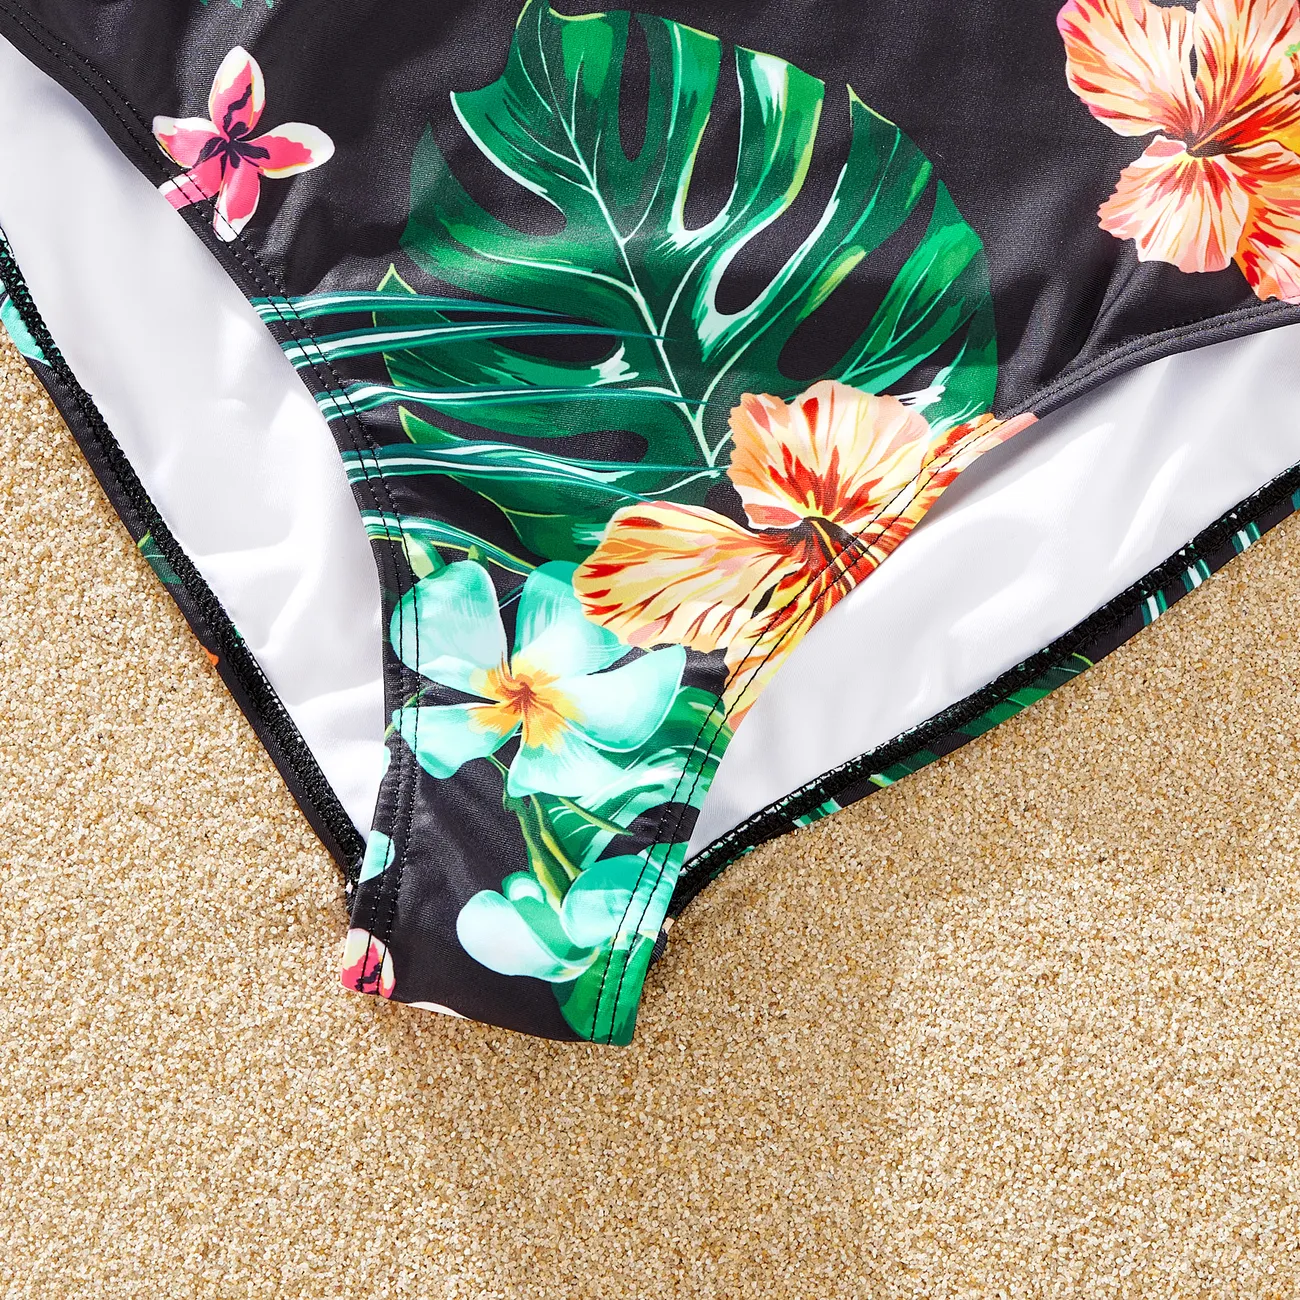 Family Matching Allover Tropical Plant Print One-piece Swimsuit and Swim Trunks Black big image 1